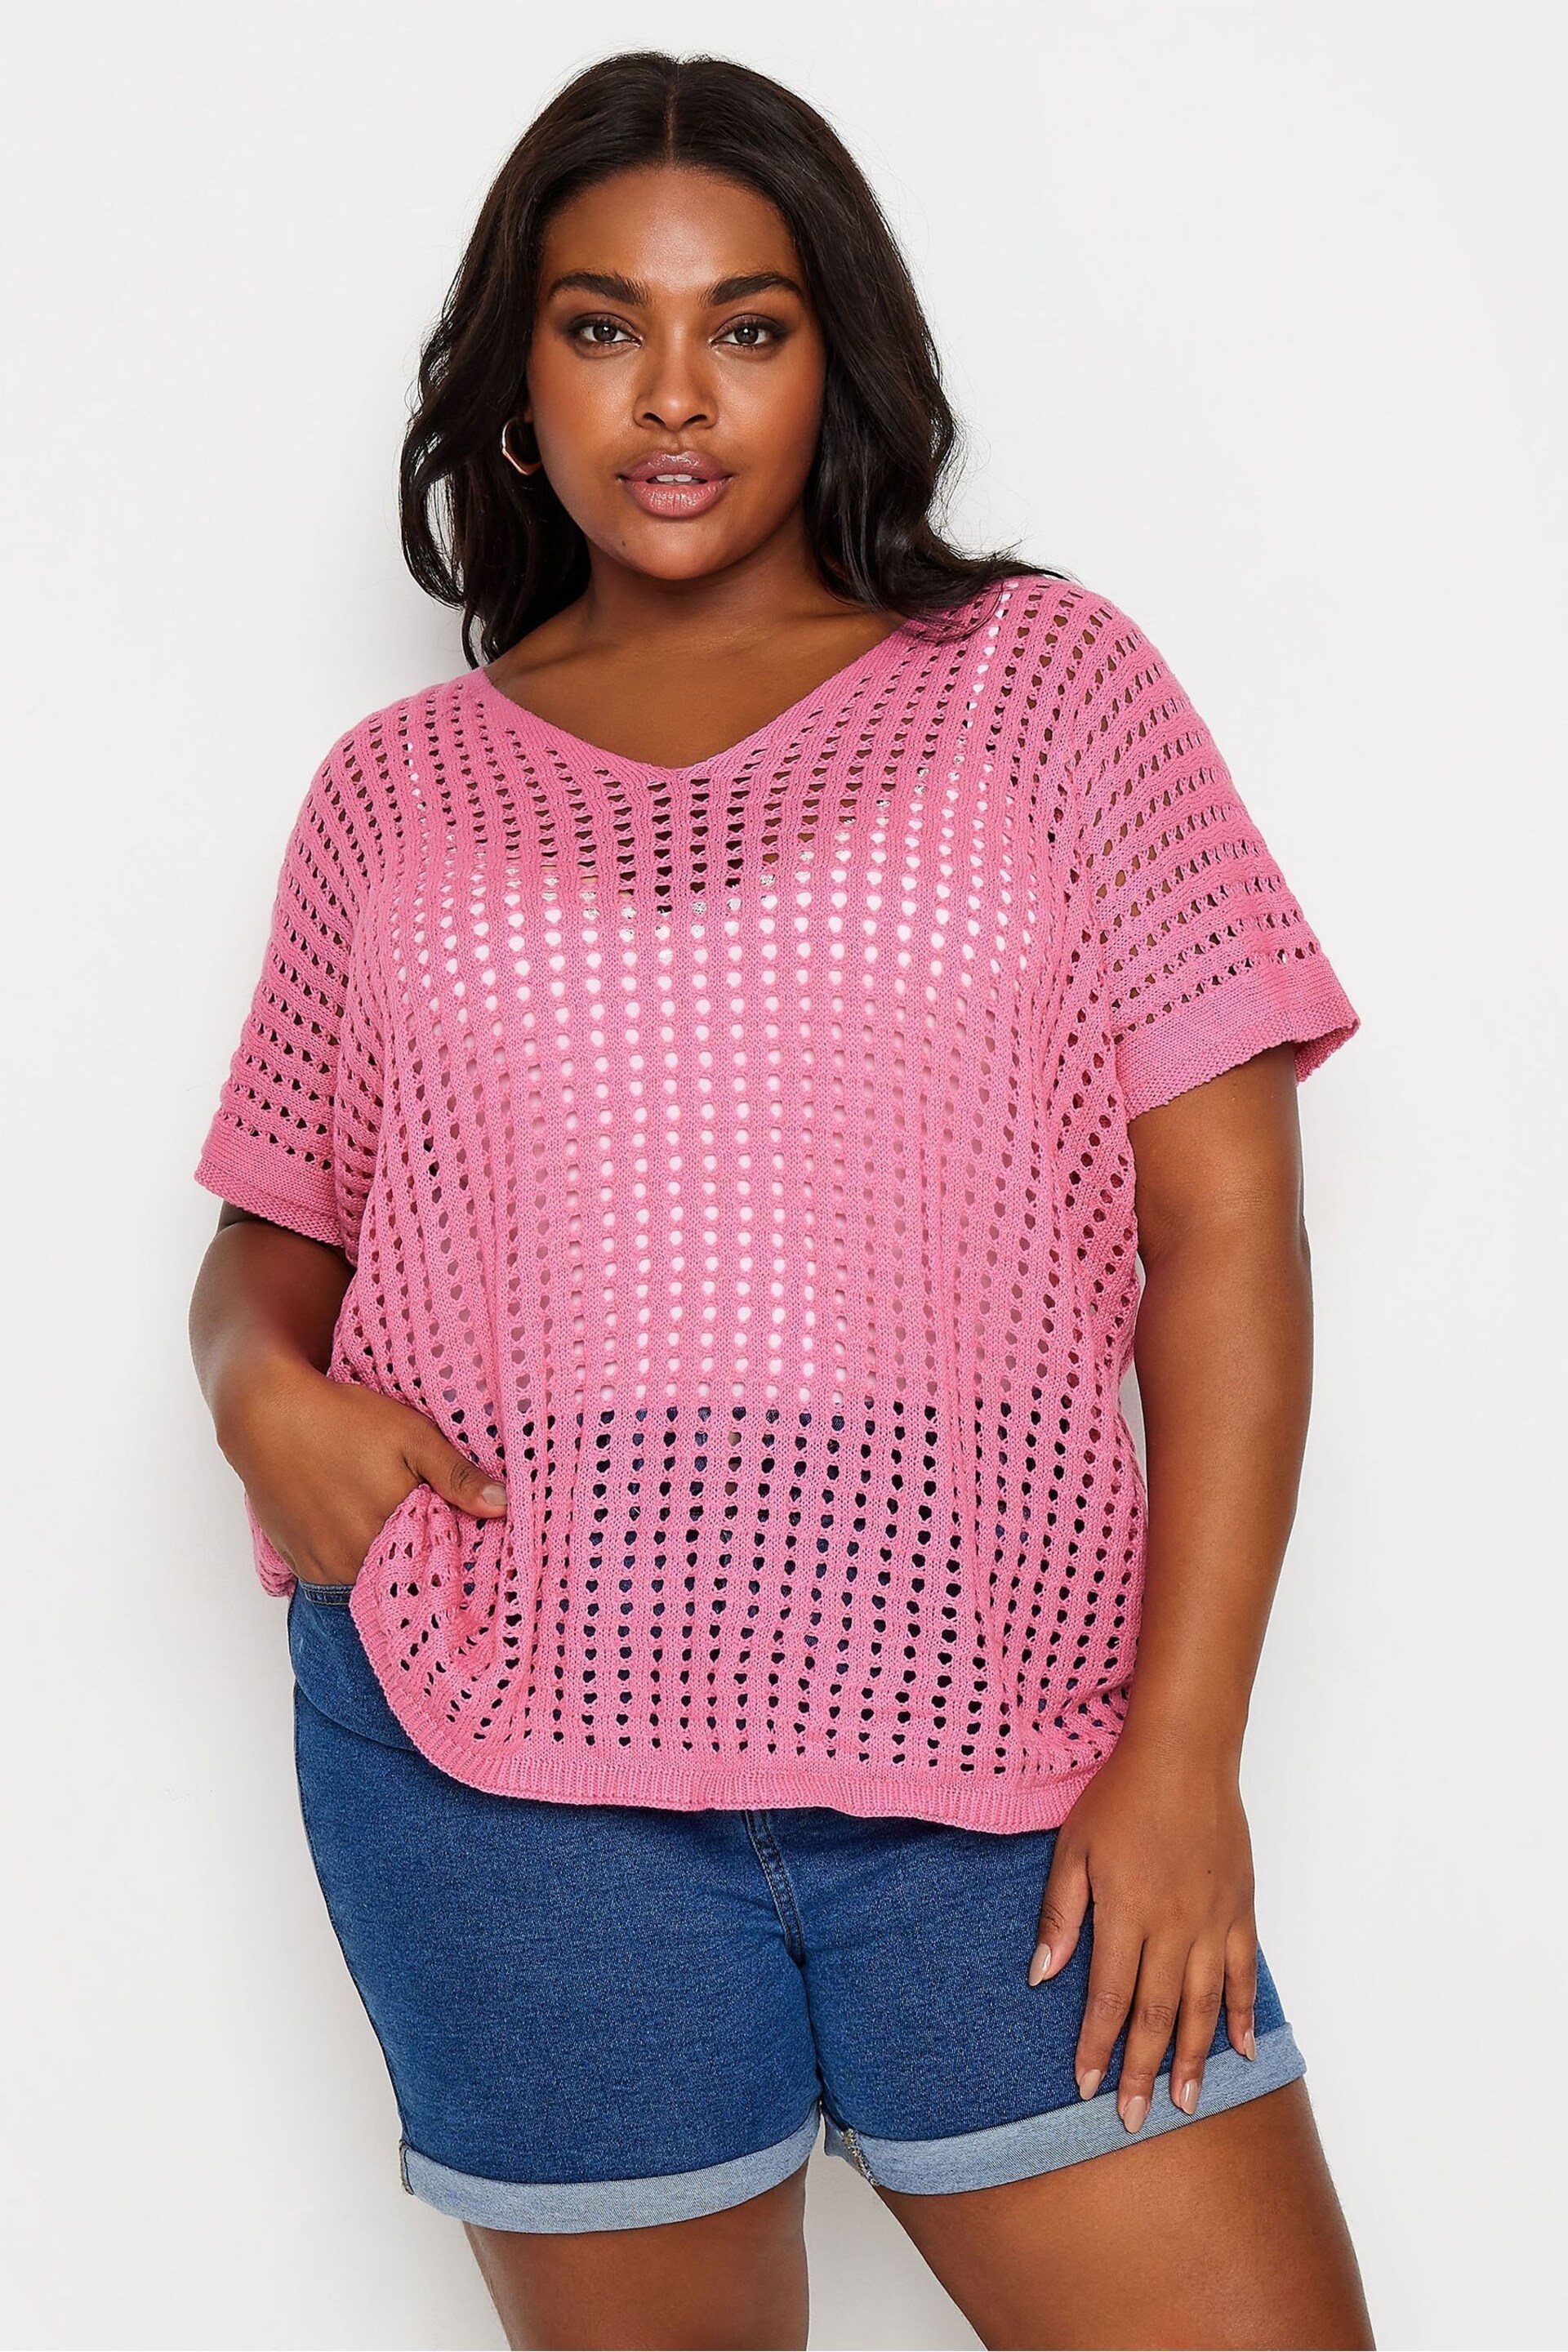 Pink YOURS Curve Pink Boxy Crochet Top - Image 1 of 5